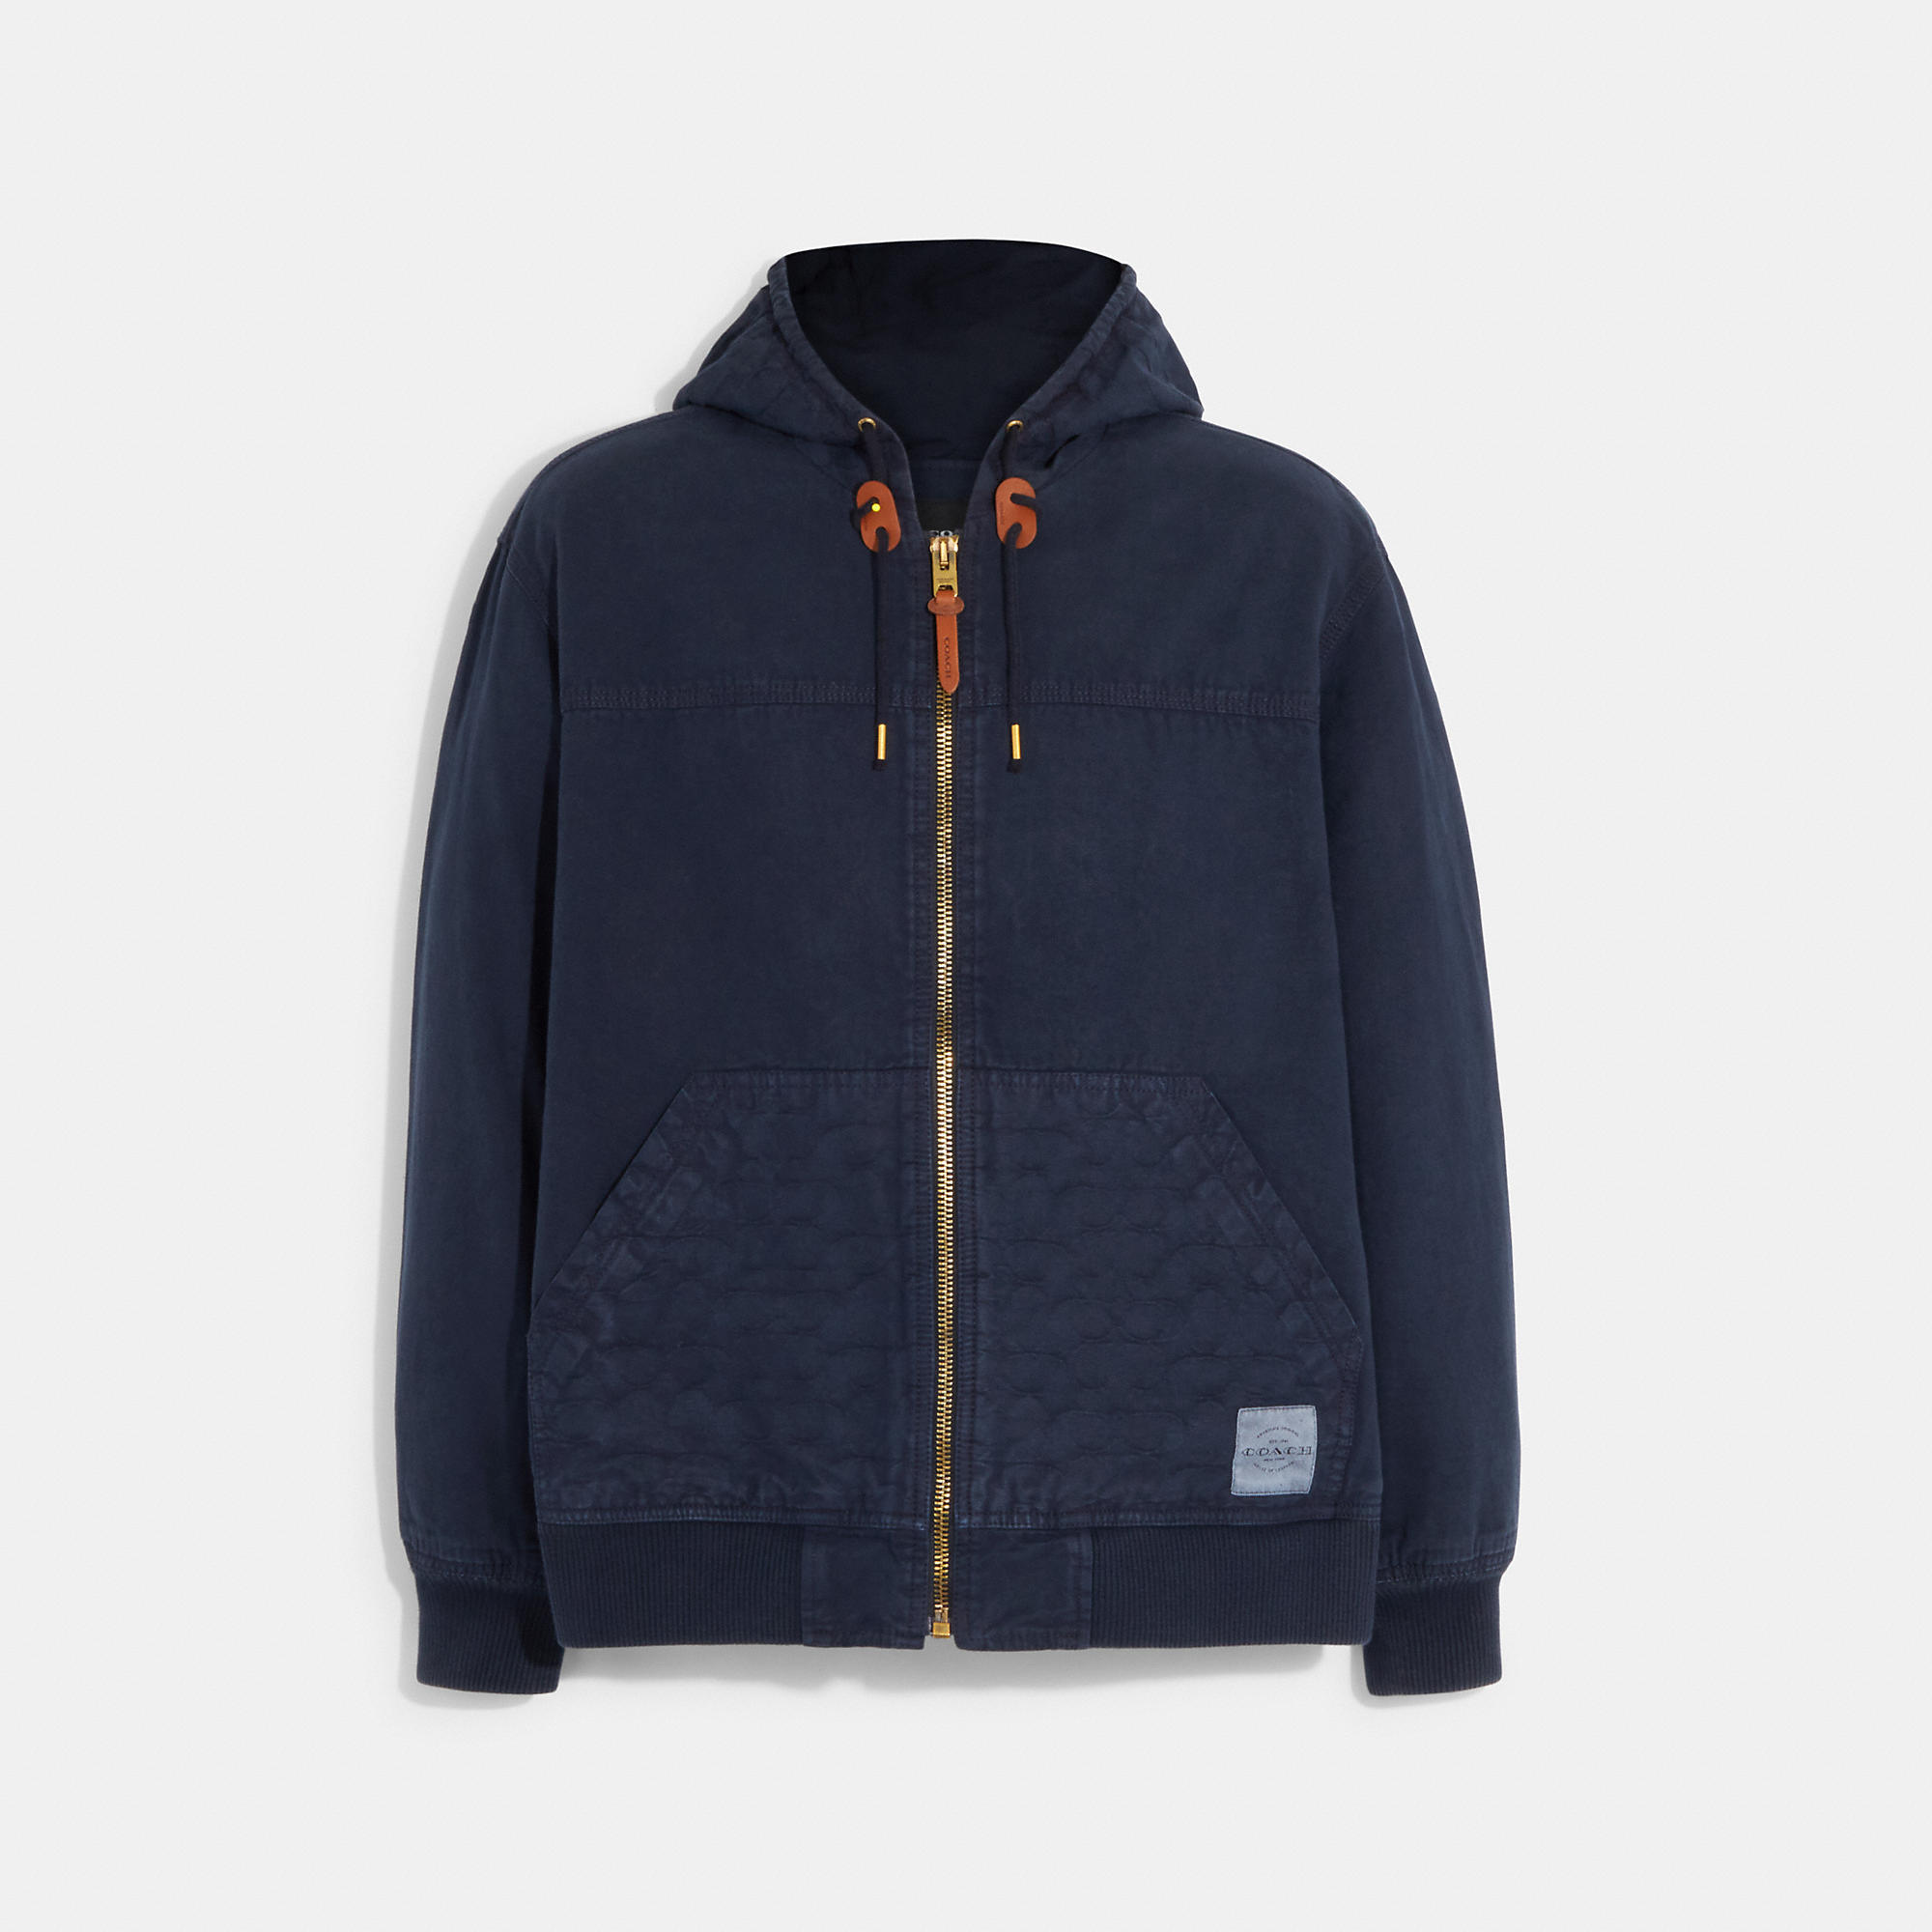 COACH OUTLET HOODED ZIP UP JACKET